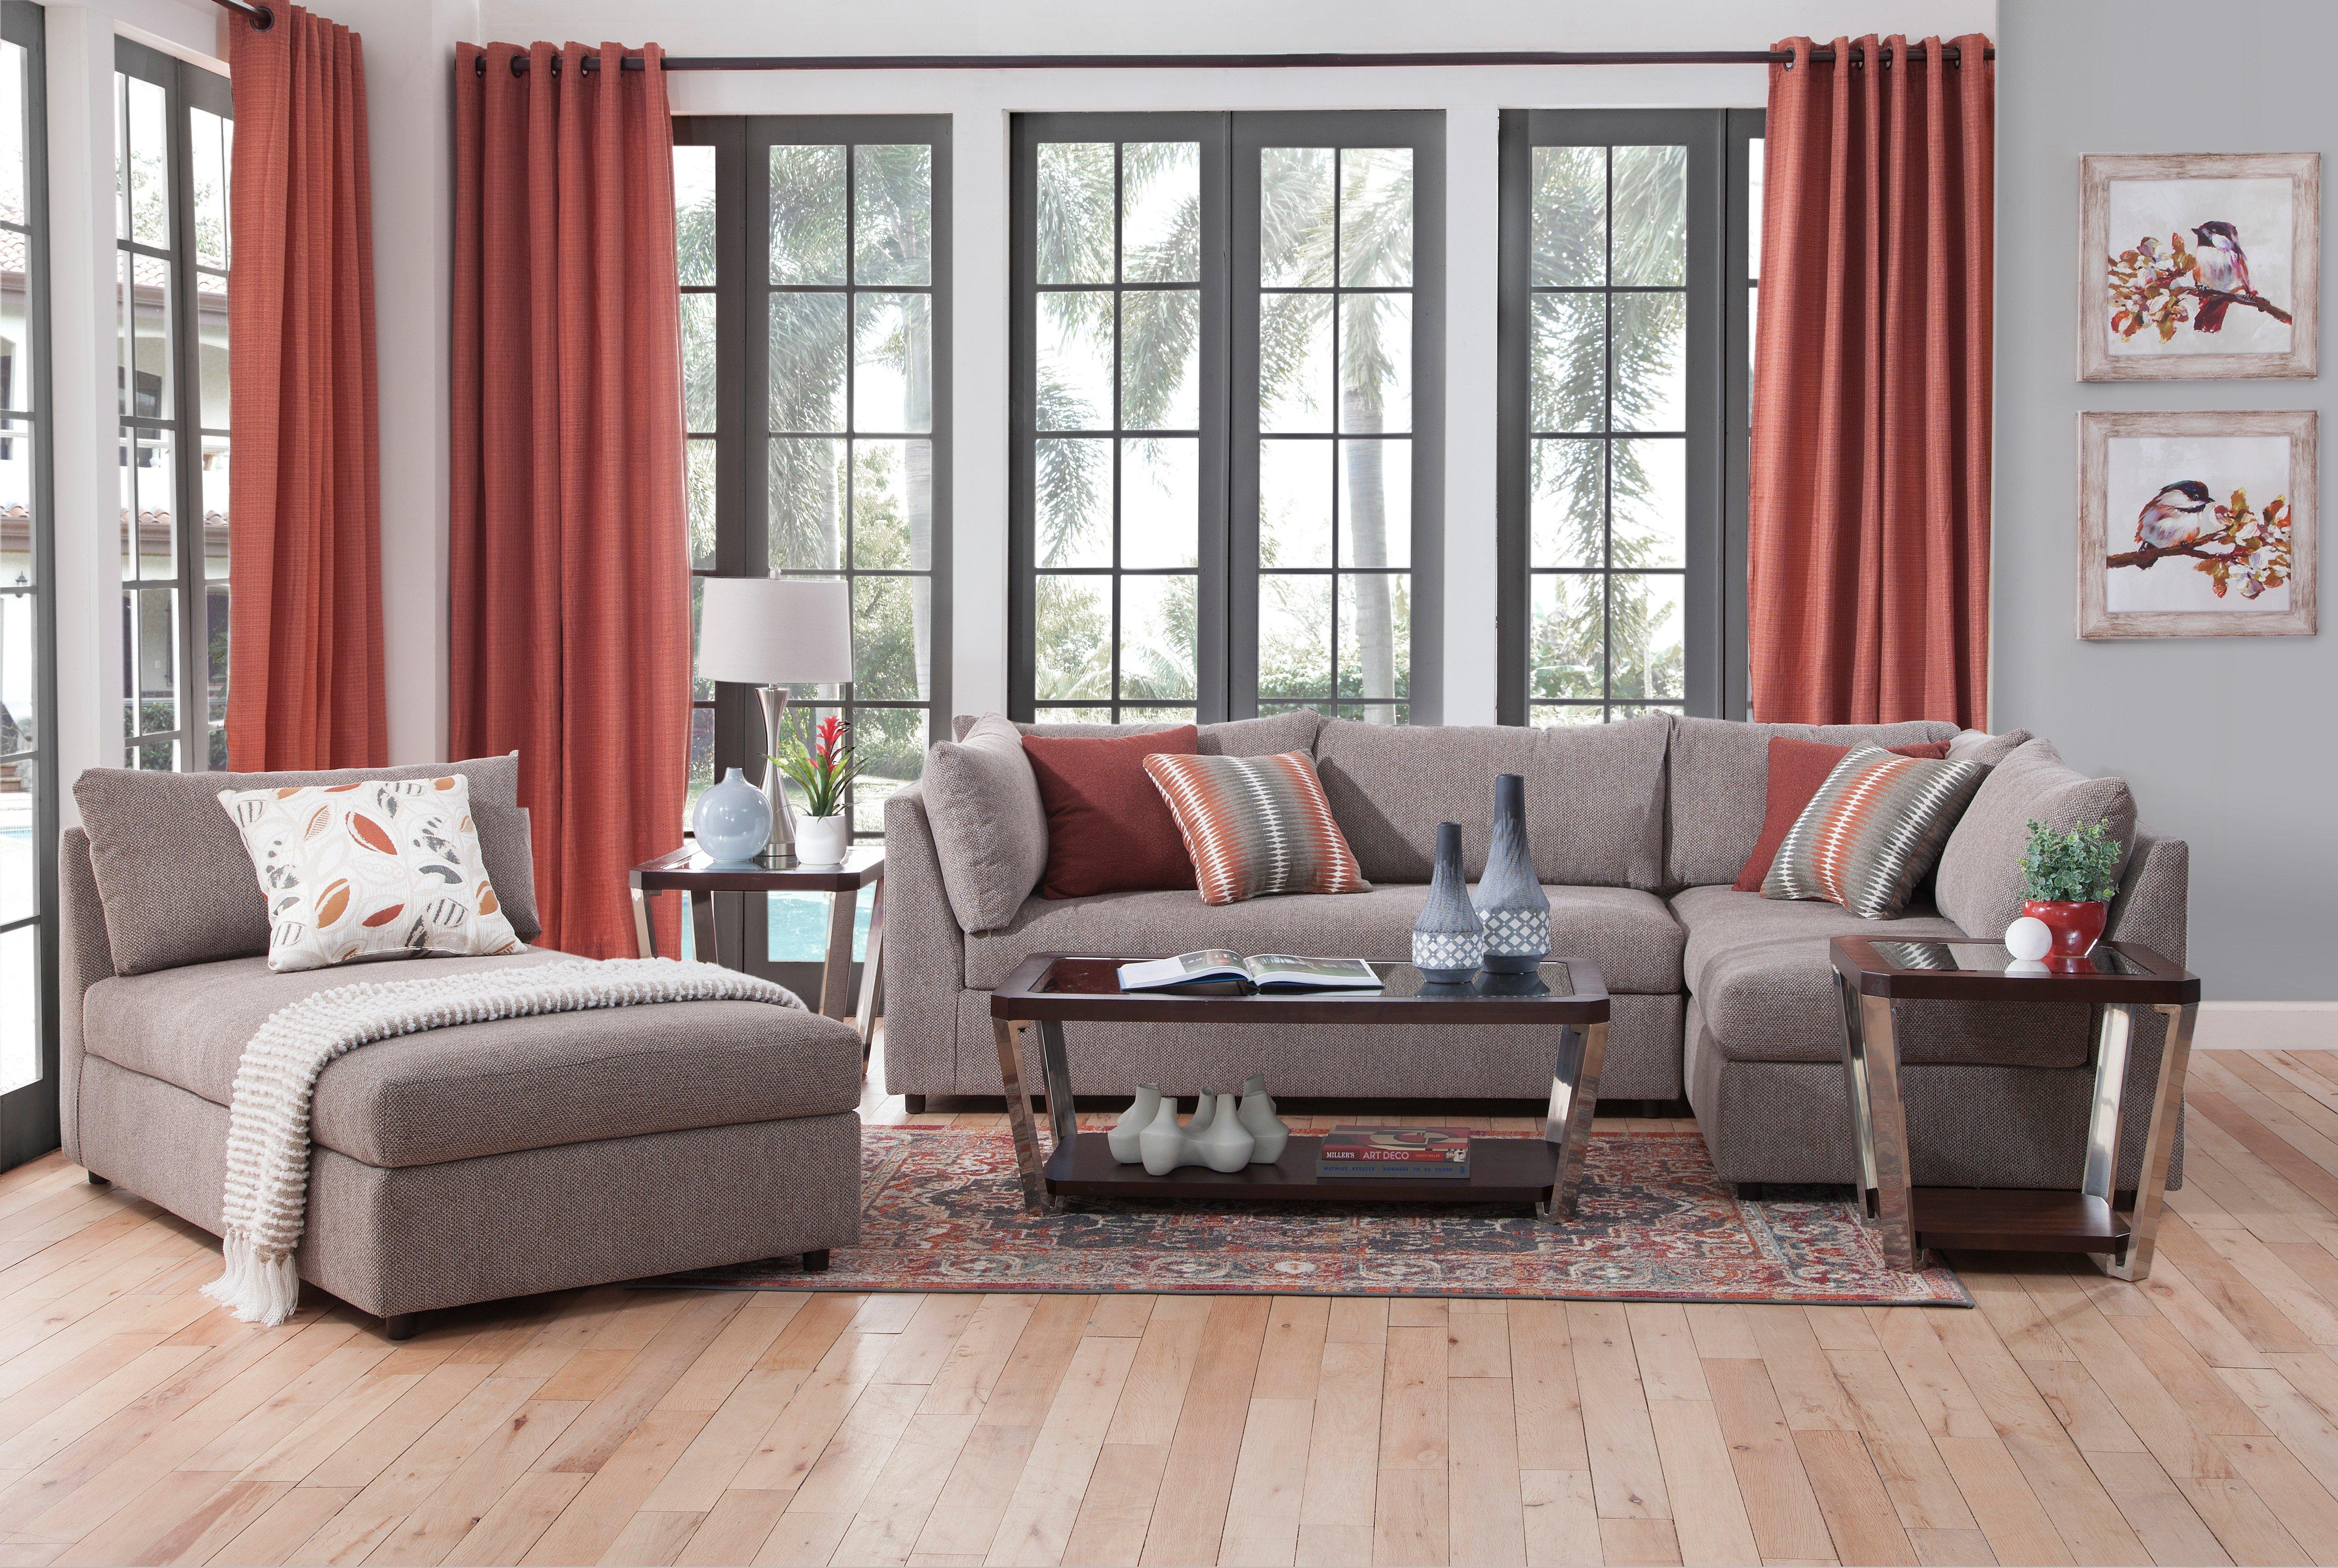 Woodhaven 7 Piece Casablanca Living Room Collection